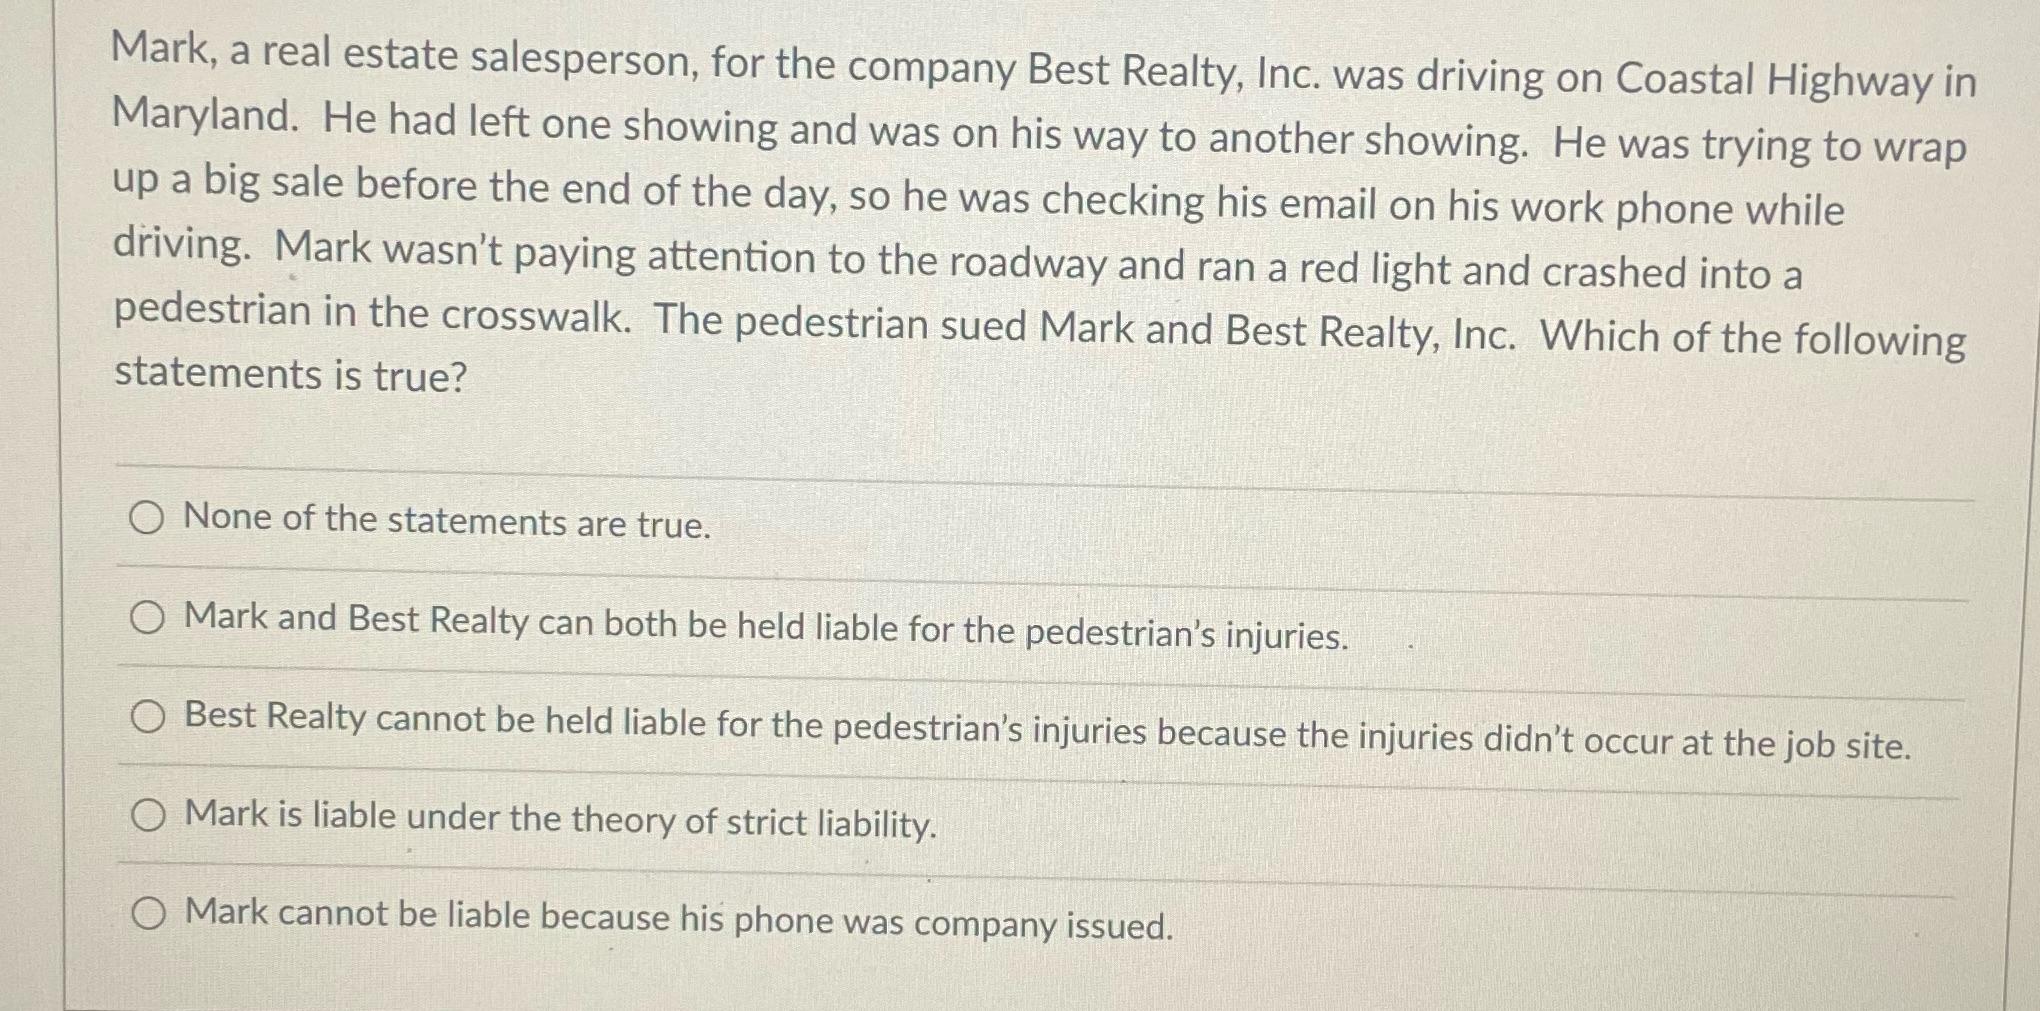 Mark, a real estate salesperson, for the company Best Realty, Inc. was driving on Coastal Highway in